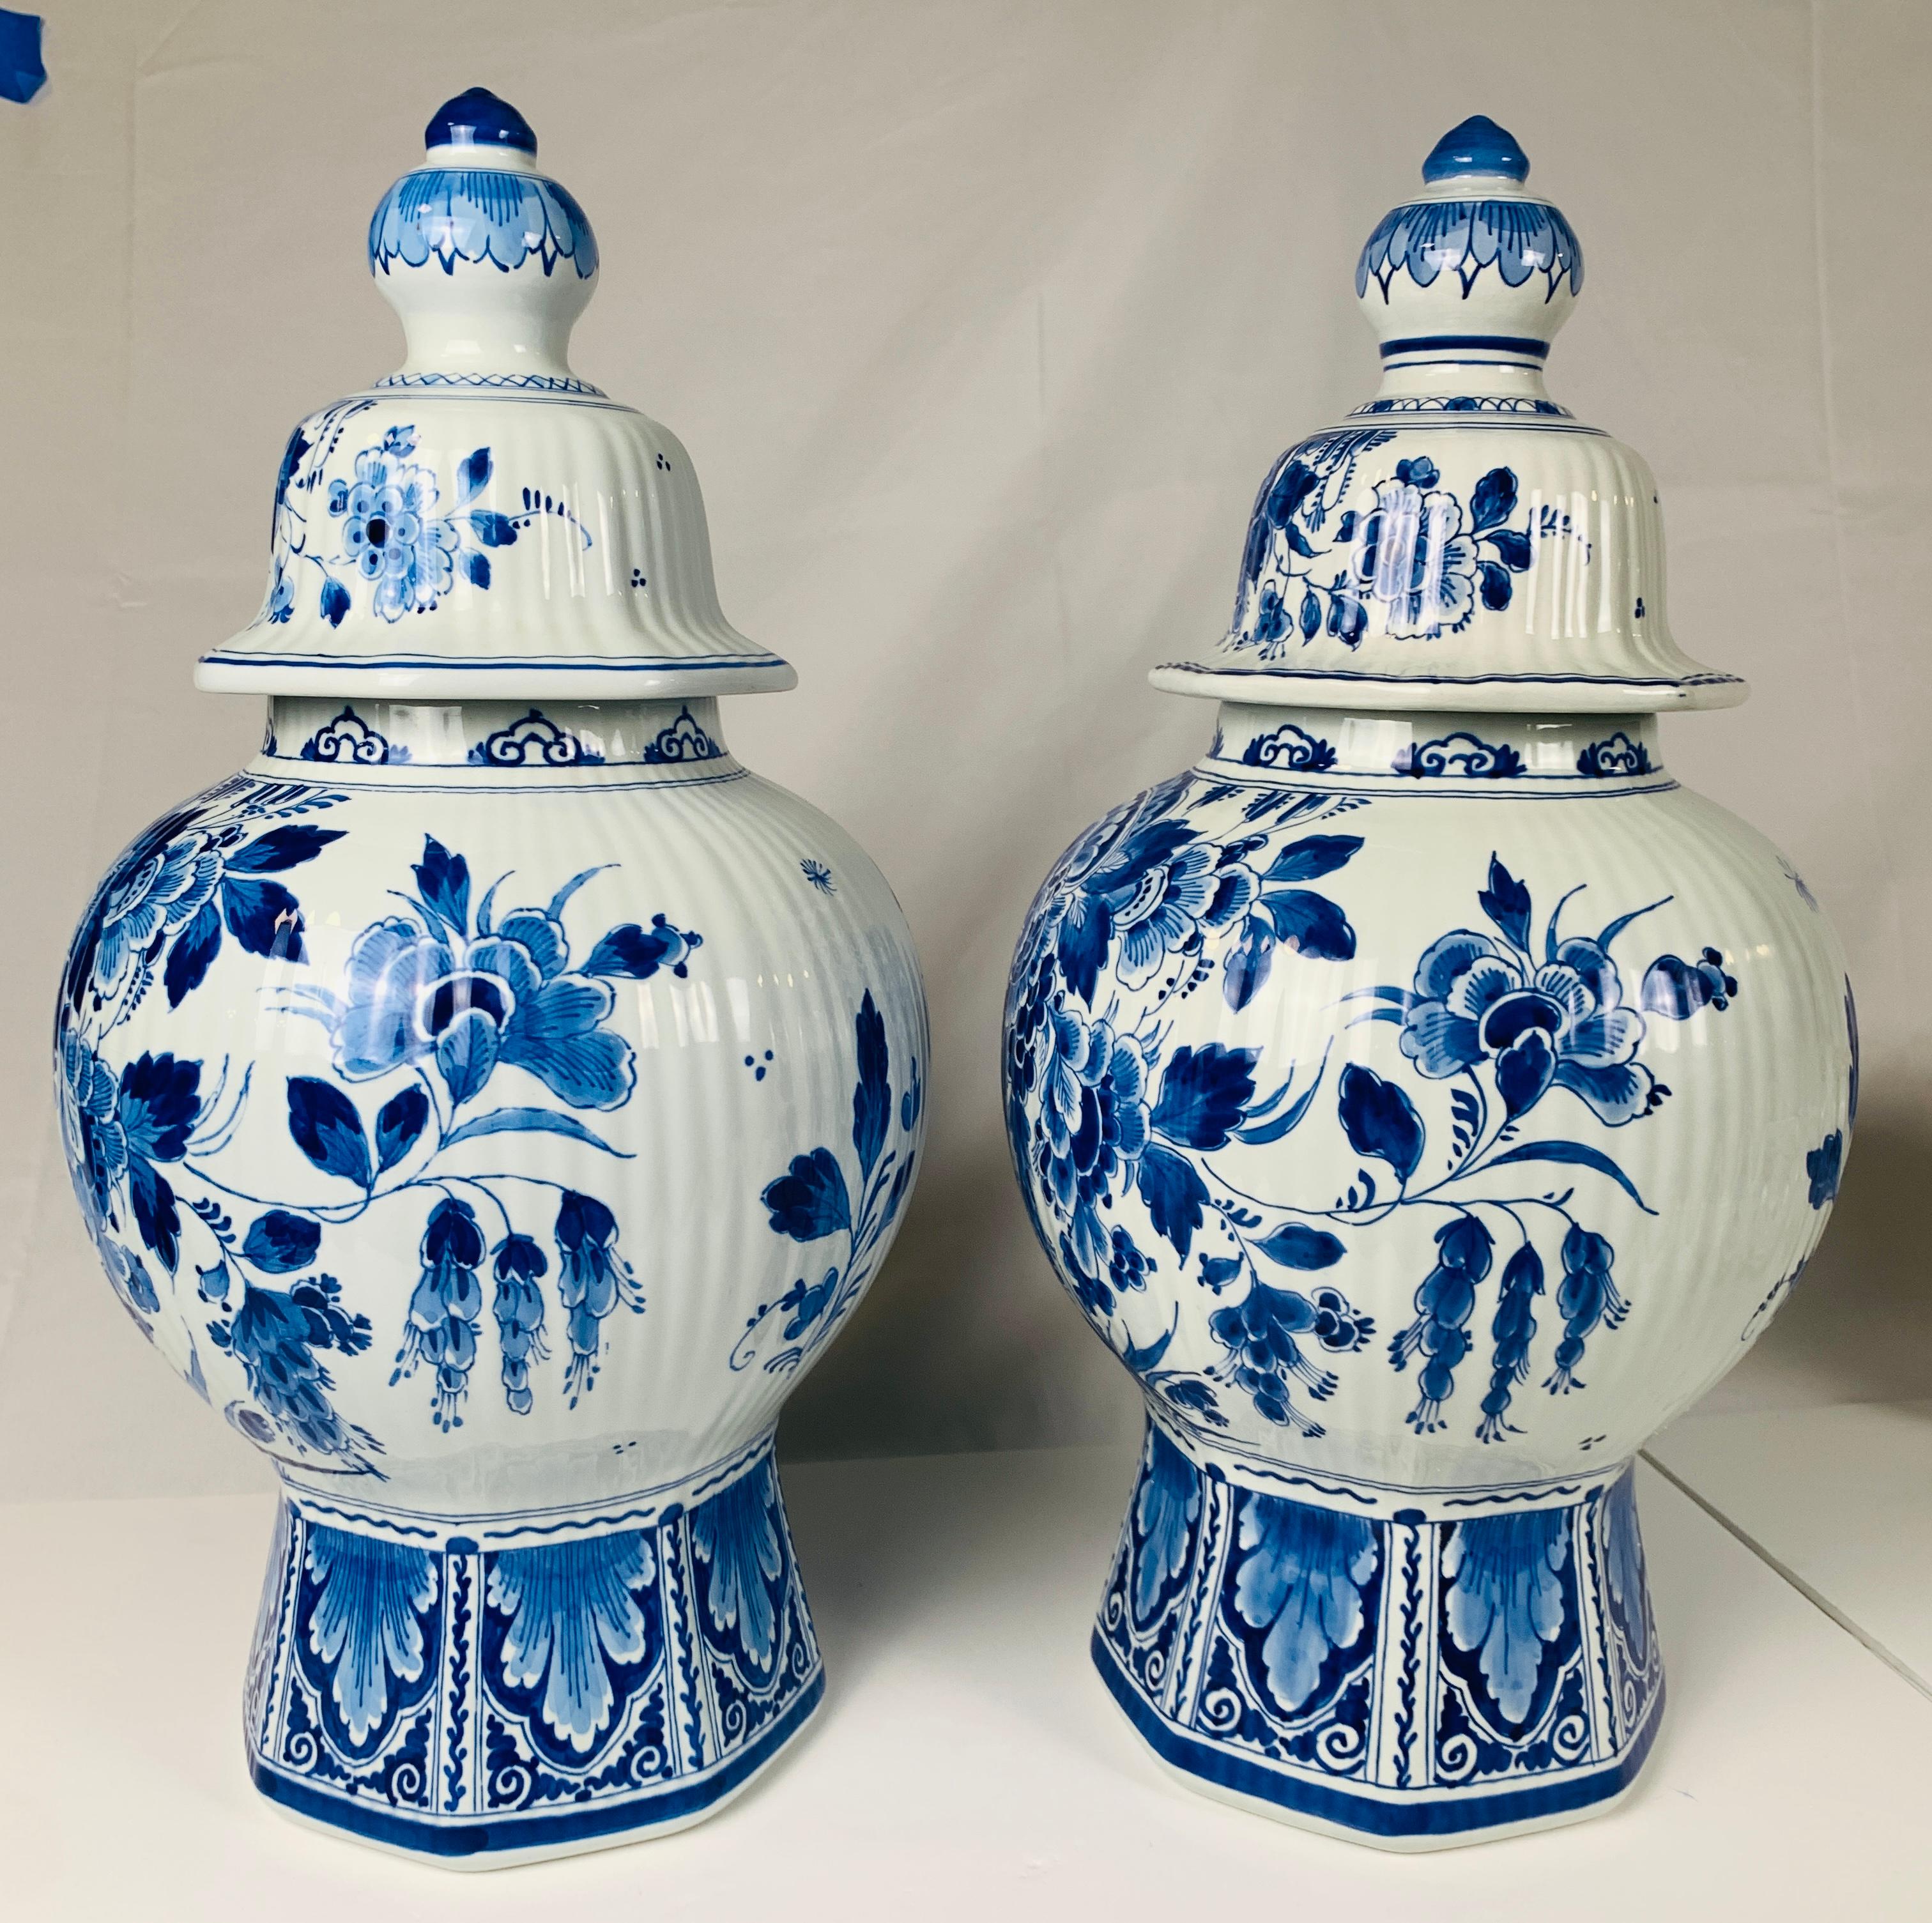 Painted in fabulous deep cobalt blue, this pair of Dutch Delft blue and white jars feature a pair of beautiful quails under a wild profusion of flowers. 
The decoration is exquisite. 
The ribbed body rises from a traditional octagonal base decorated